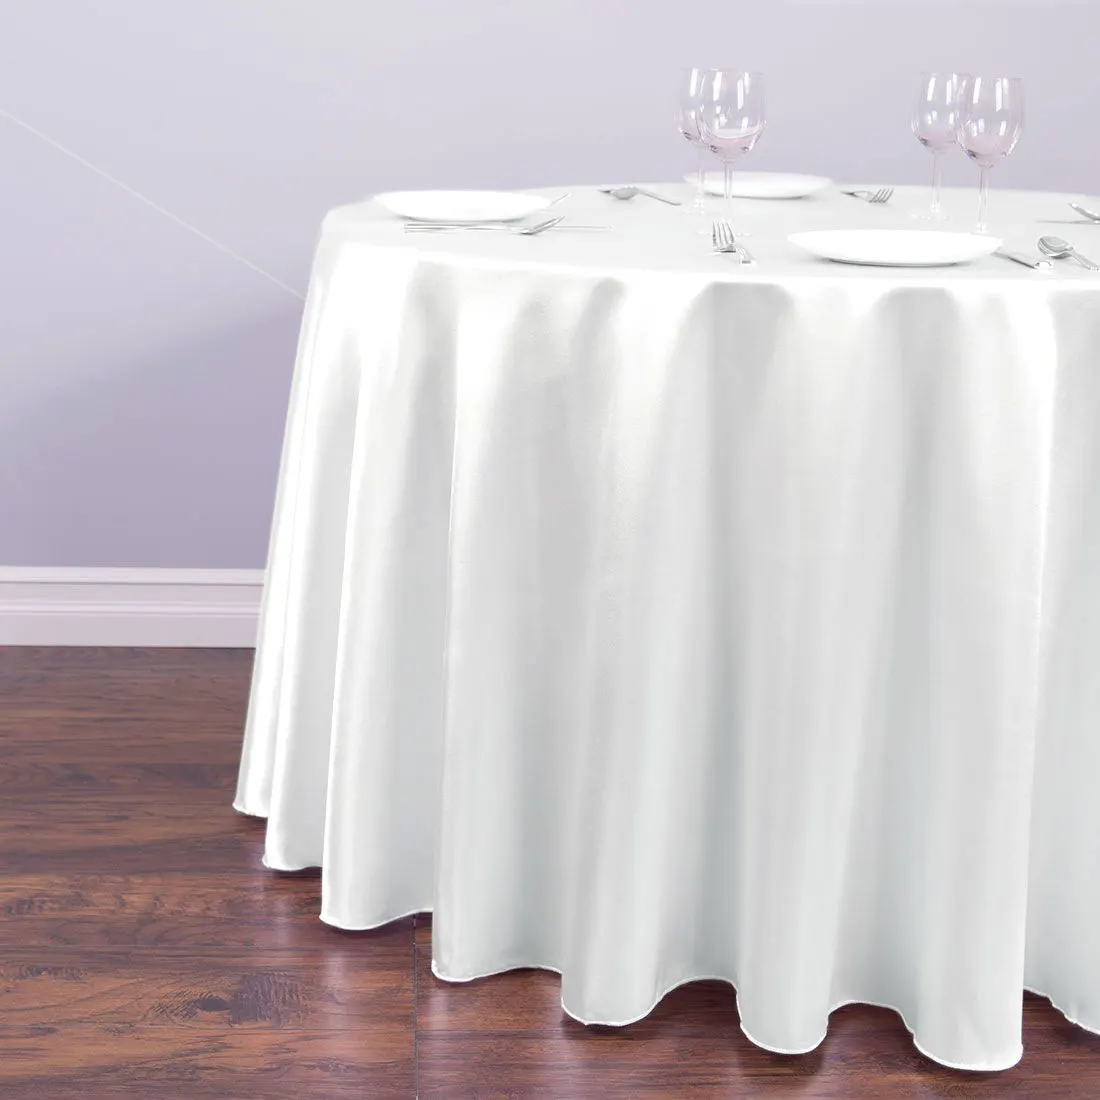 

White Round Satin Table Cloths Banquet Table Covers Dining Table Linens for Home Party Event Hotel Wedding Birthday Party Decor